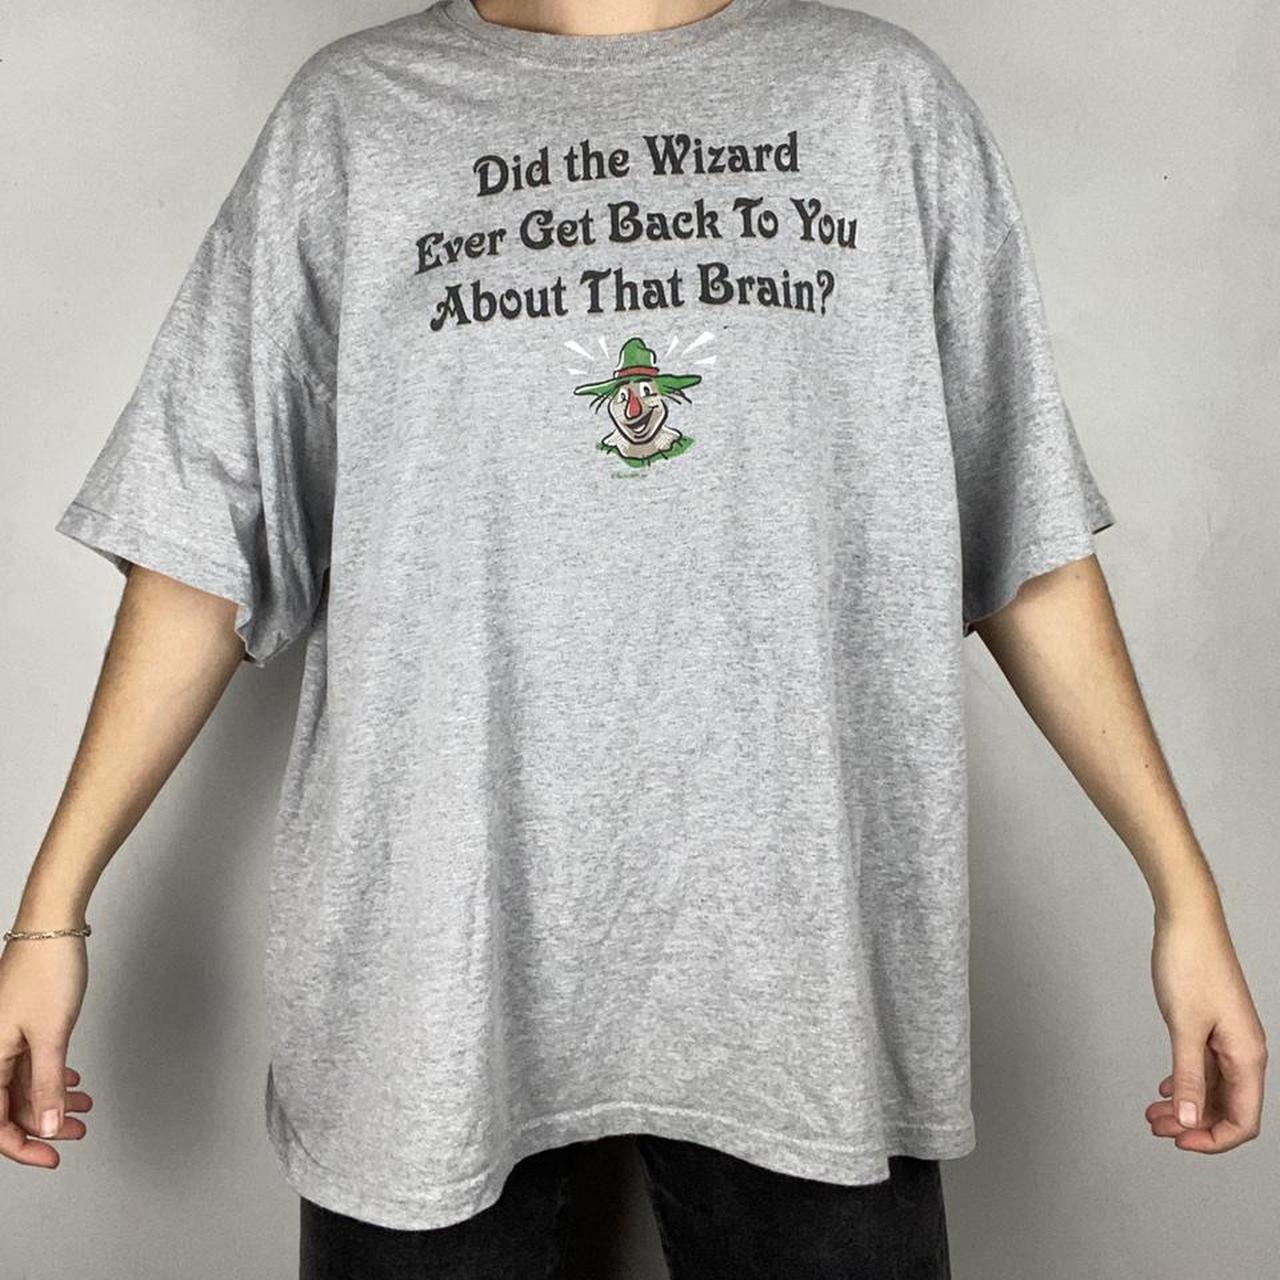 Product Image 2 - Funny Tee🥞
This super funny Wizard